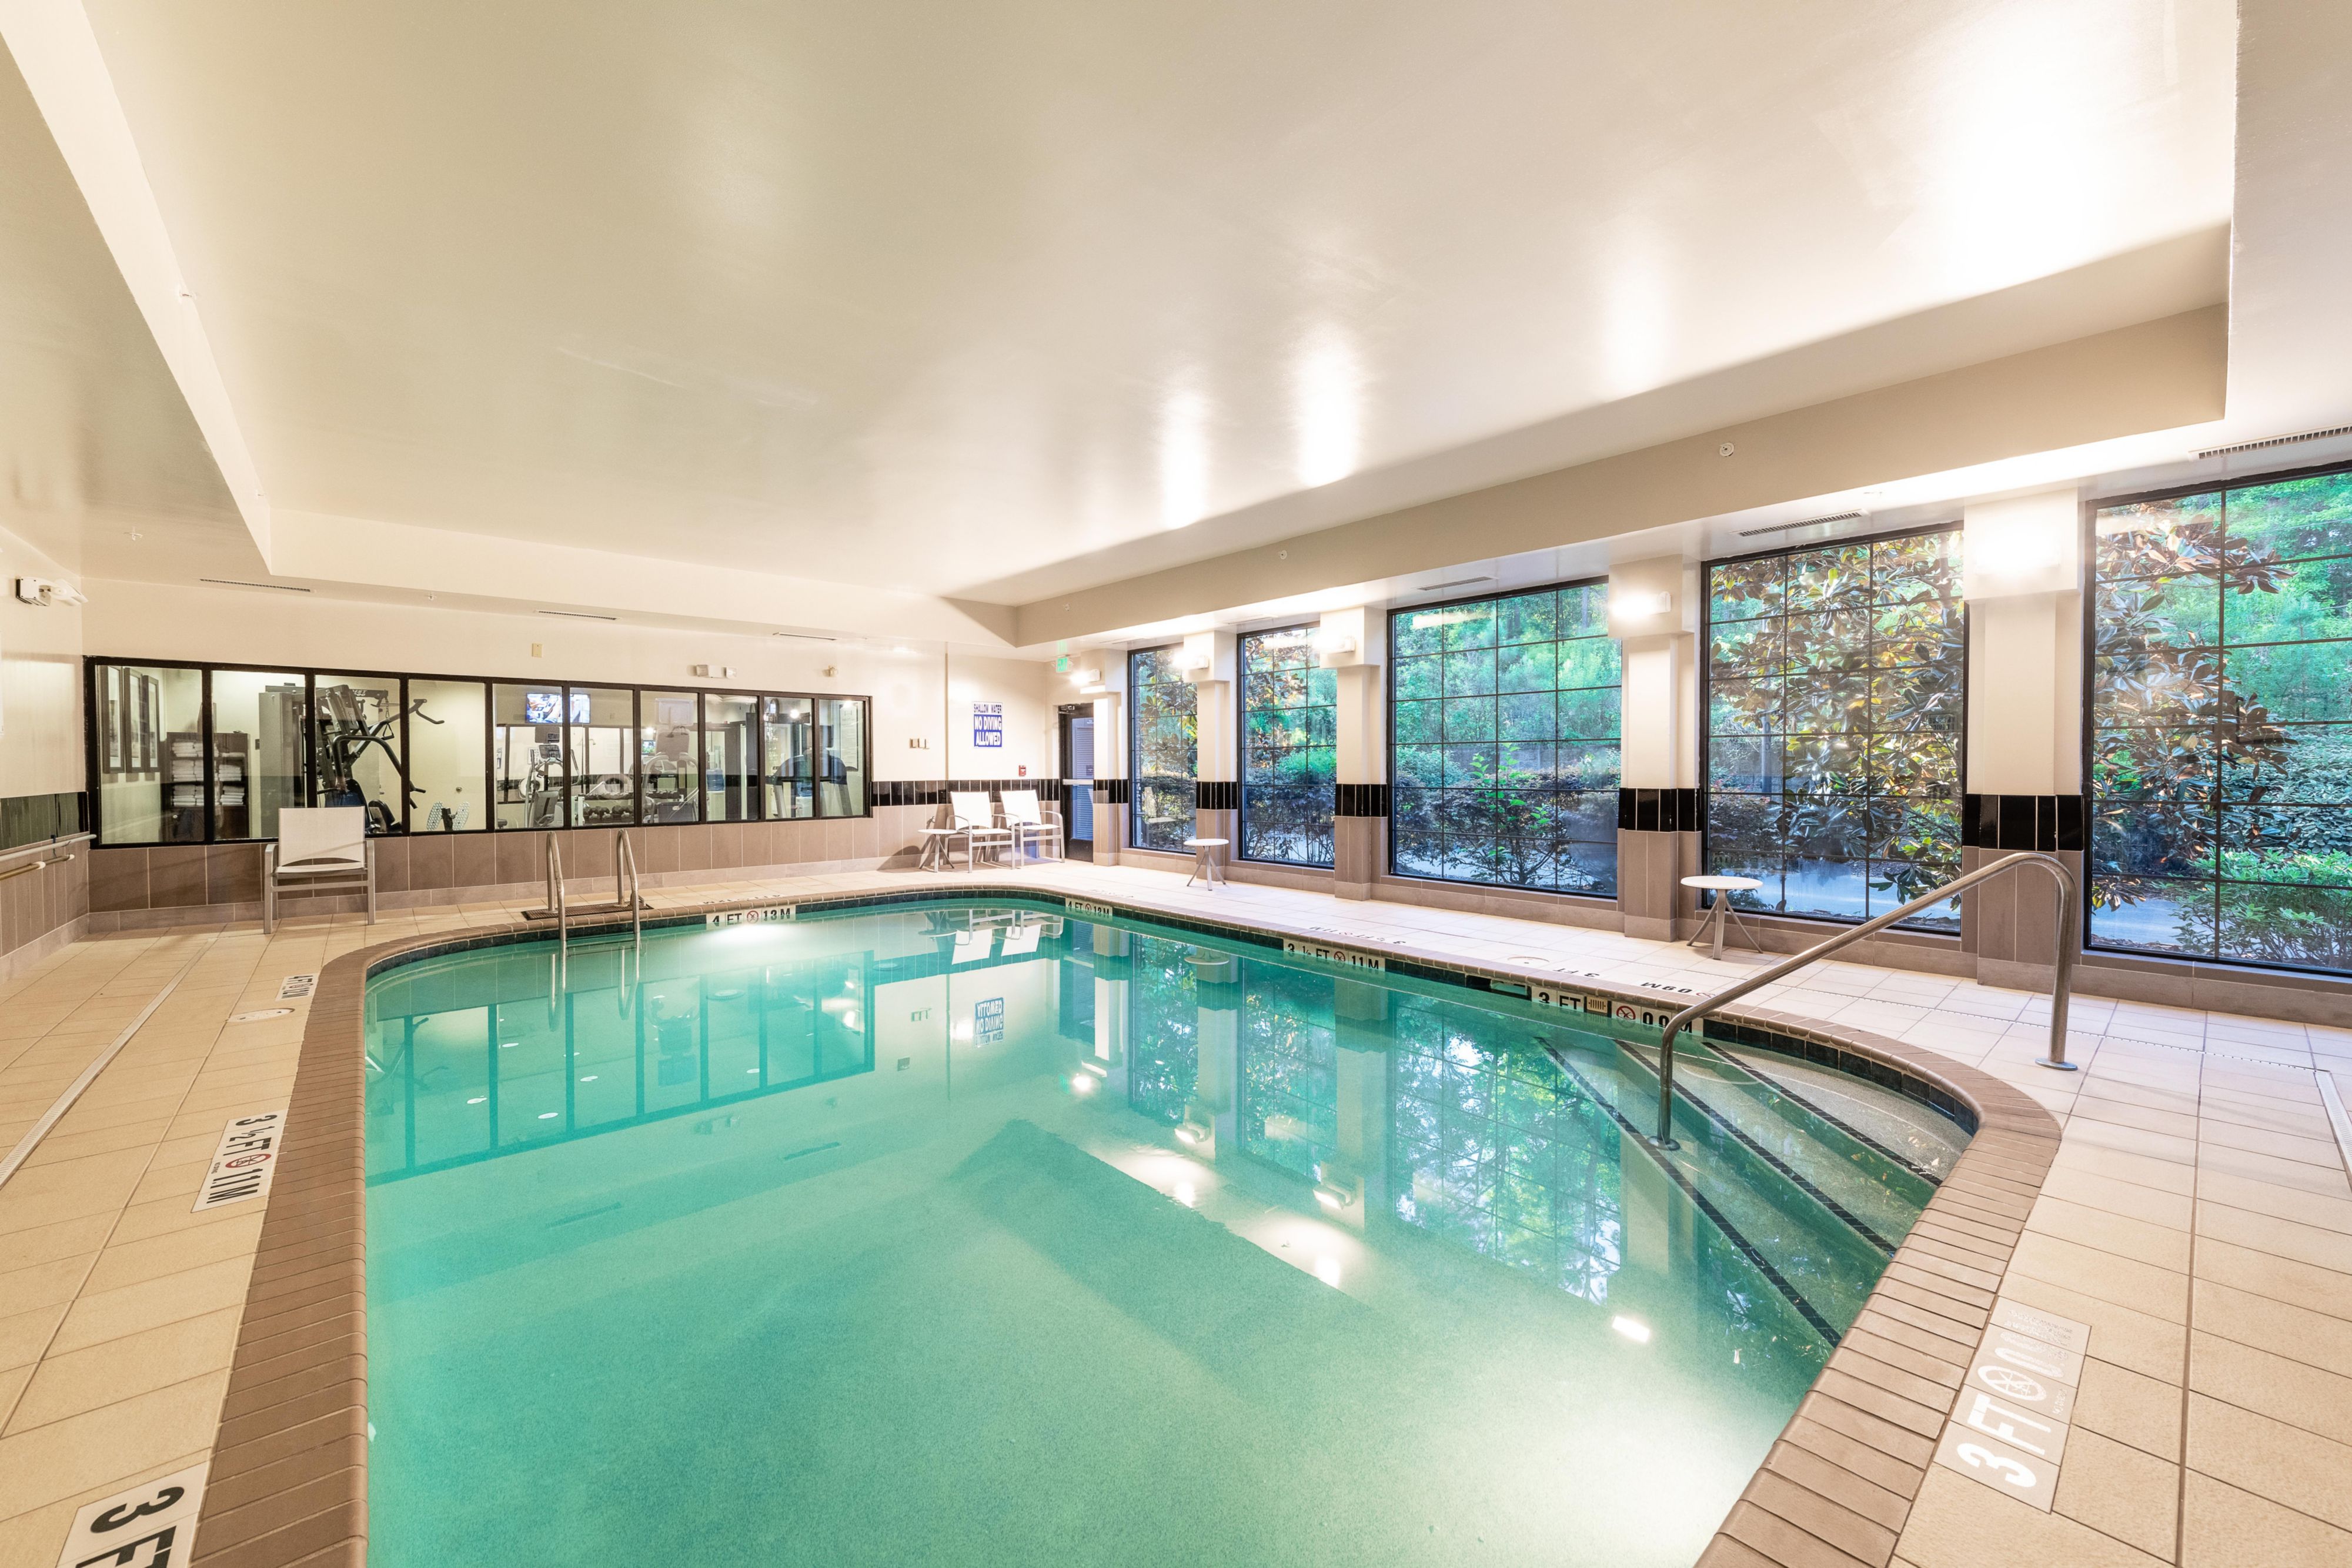 Our indoor pool is heated and open all year.